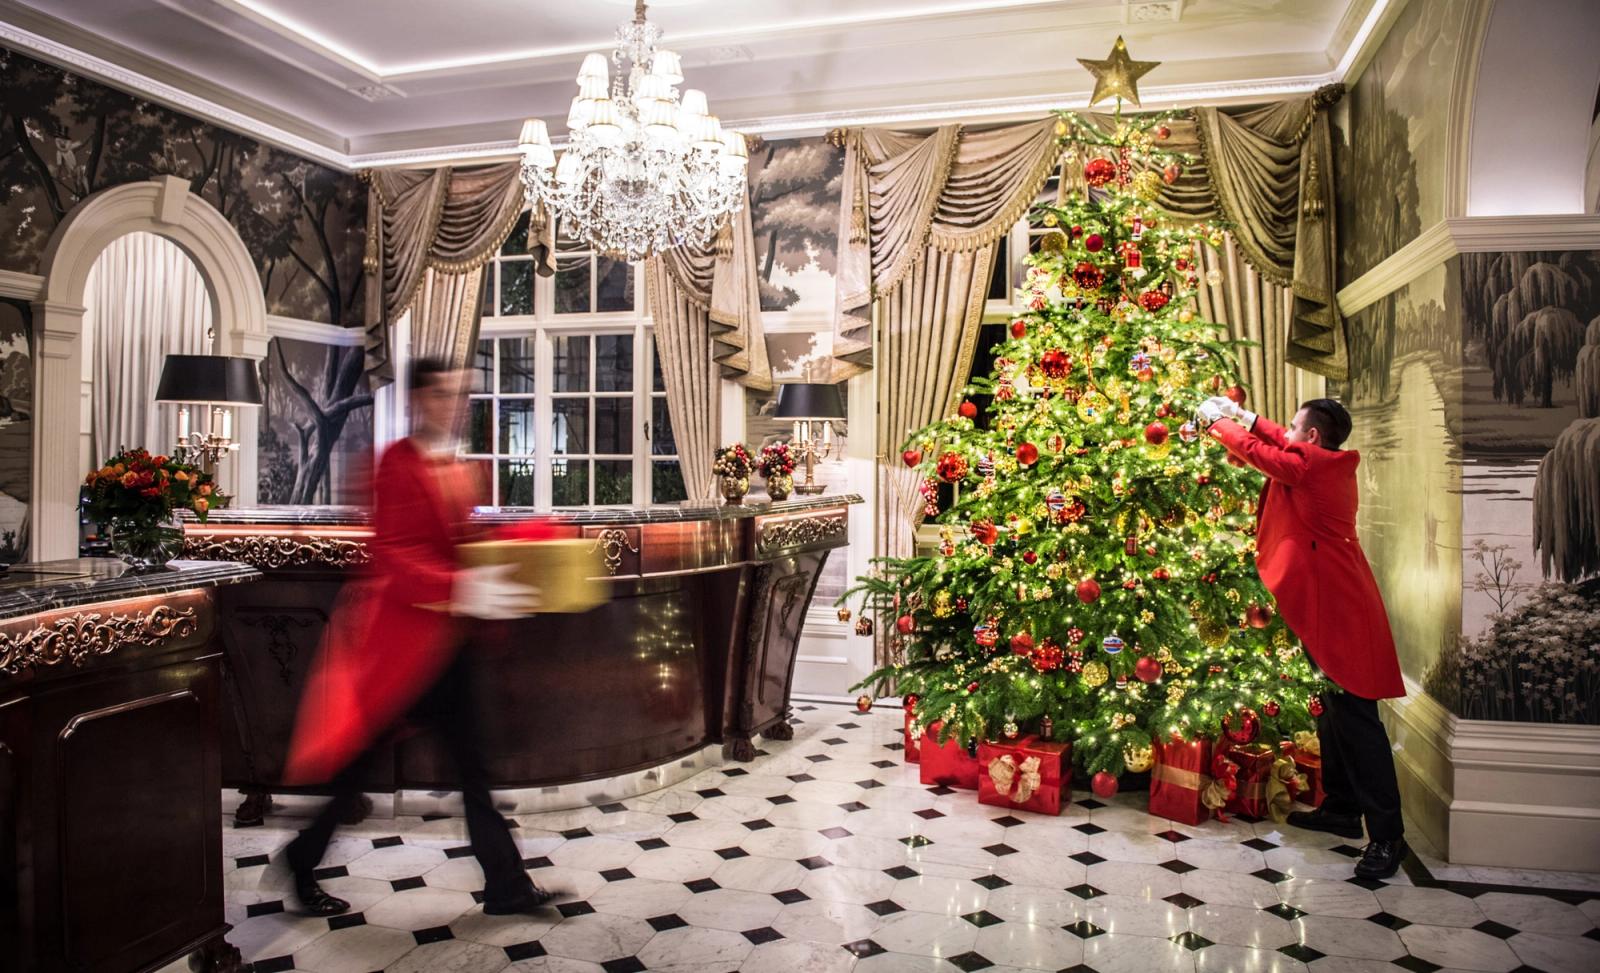 Hotels for Christmas in London